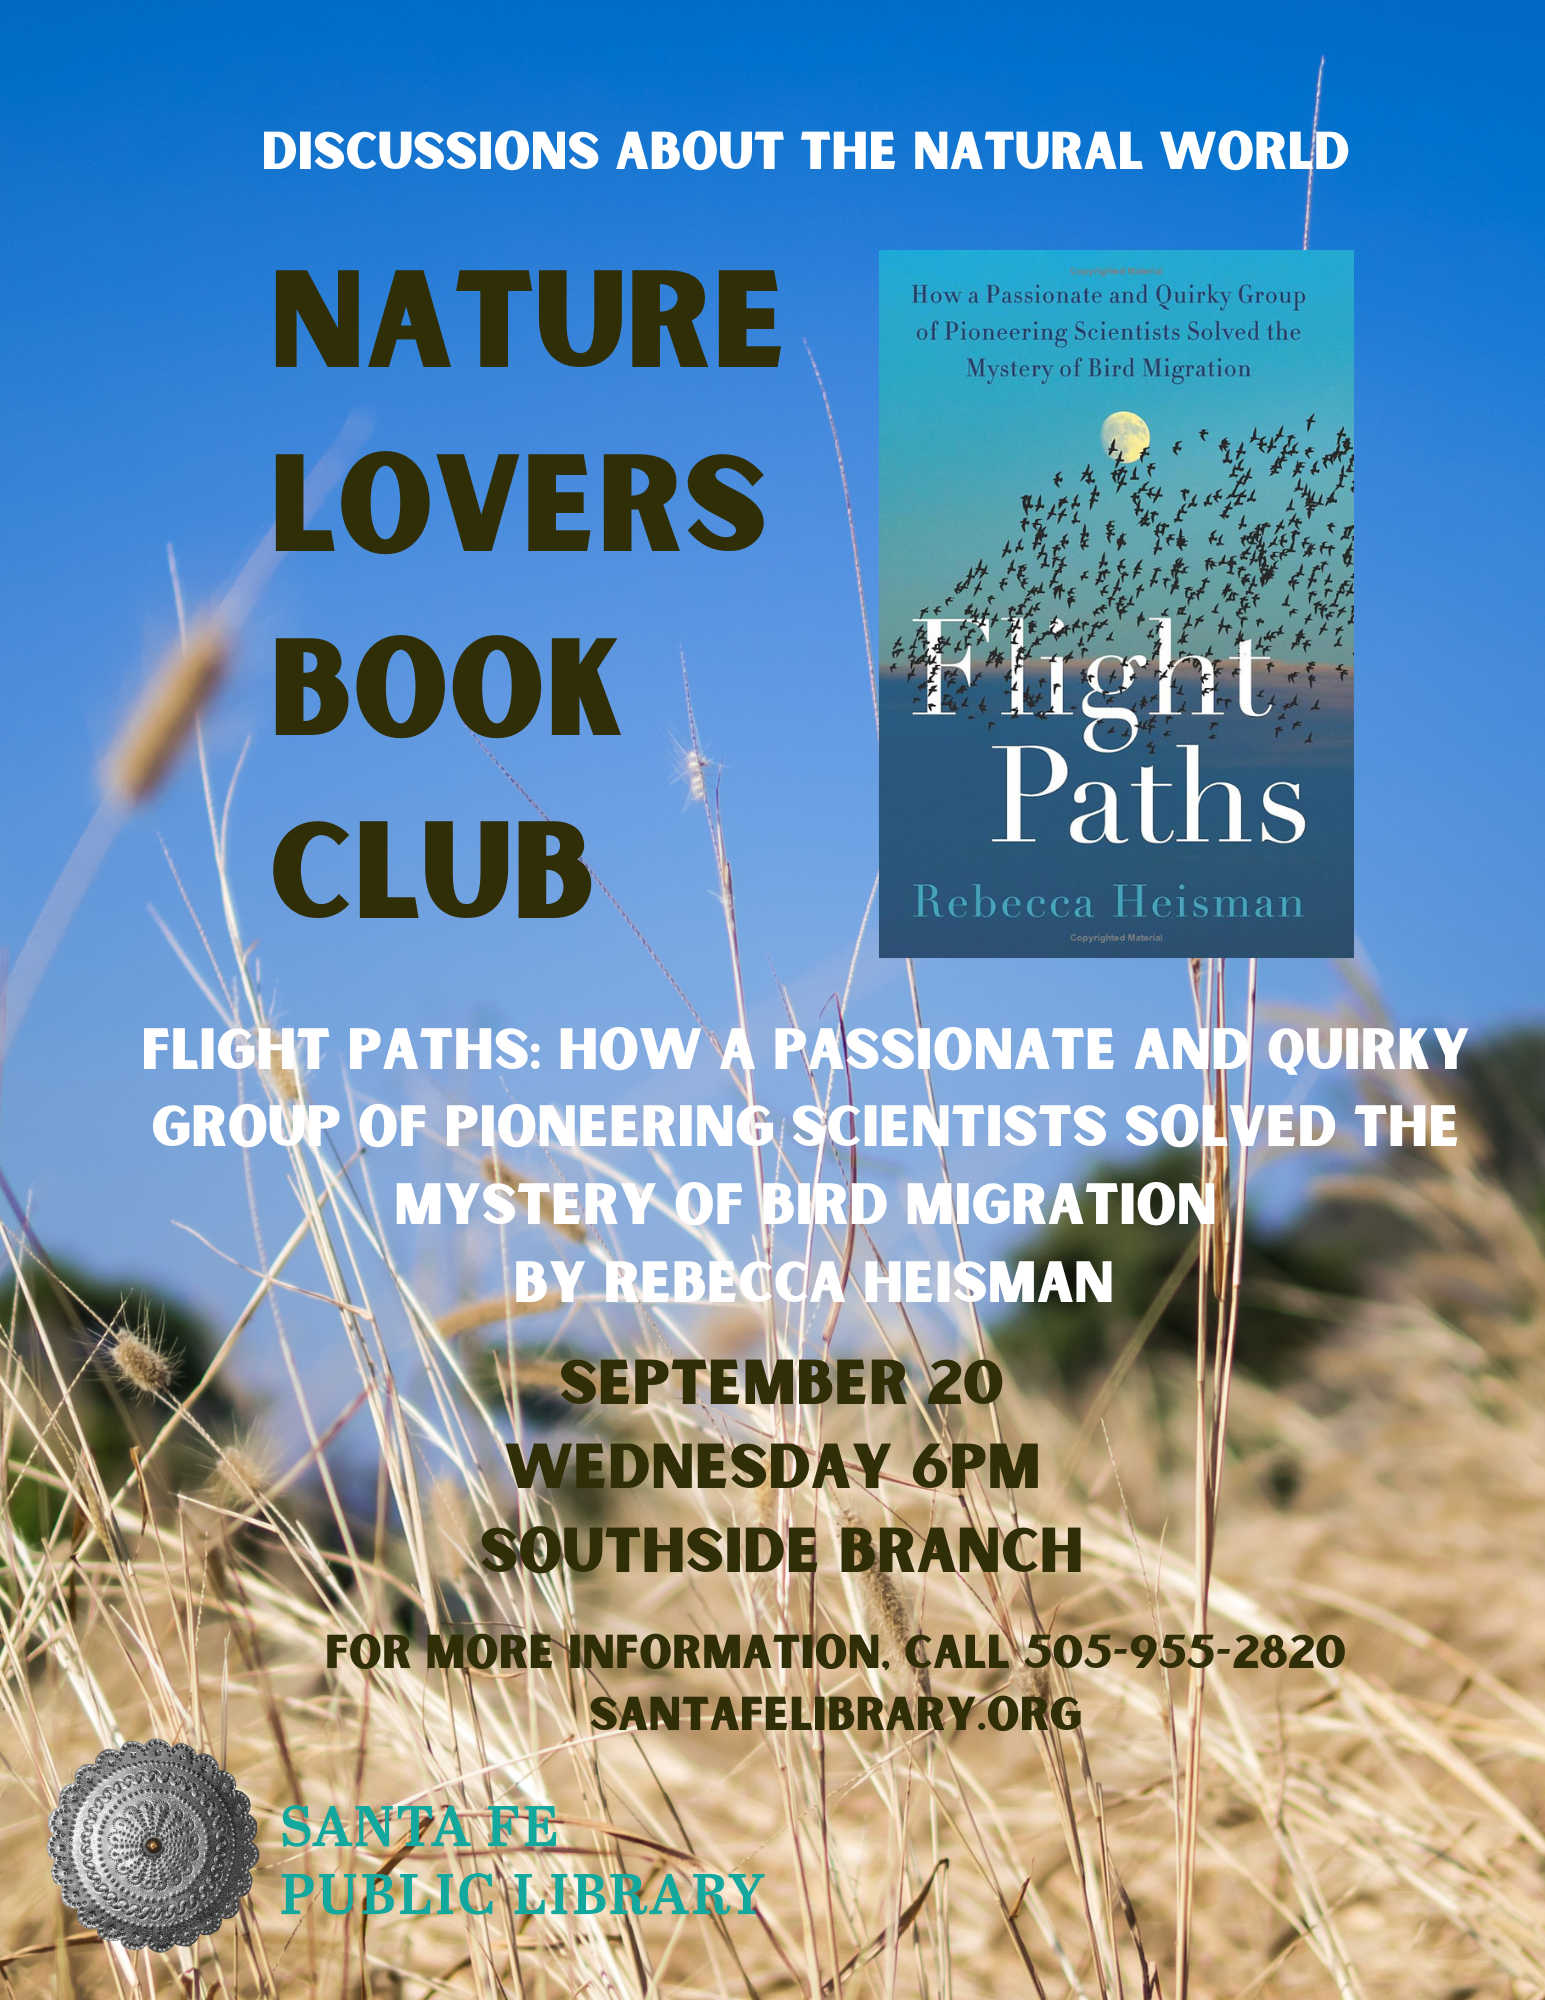 Nature Lovers Book Club discusses Flight Paths by Rebecca Heisman